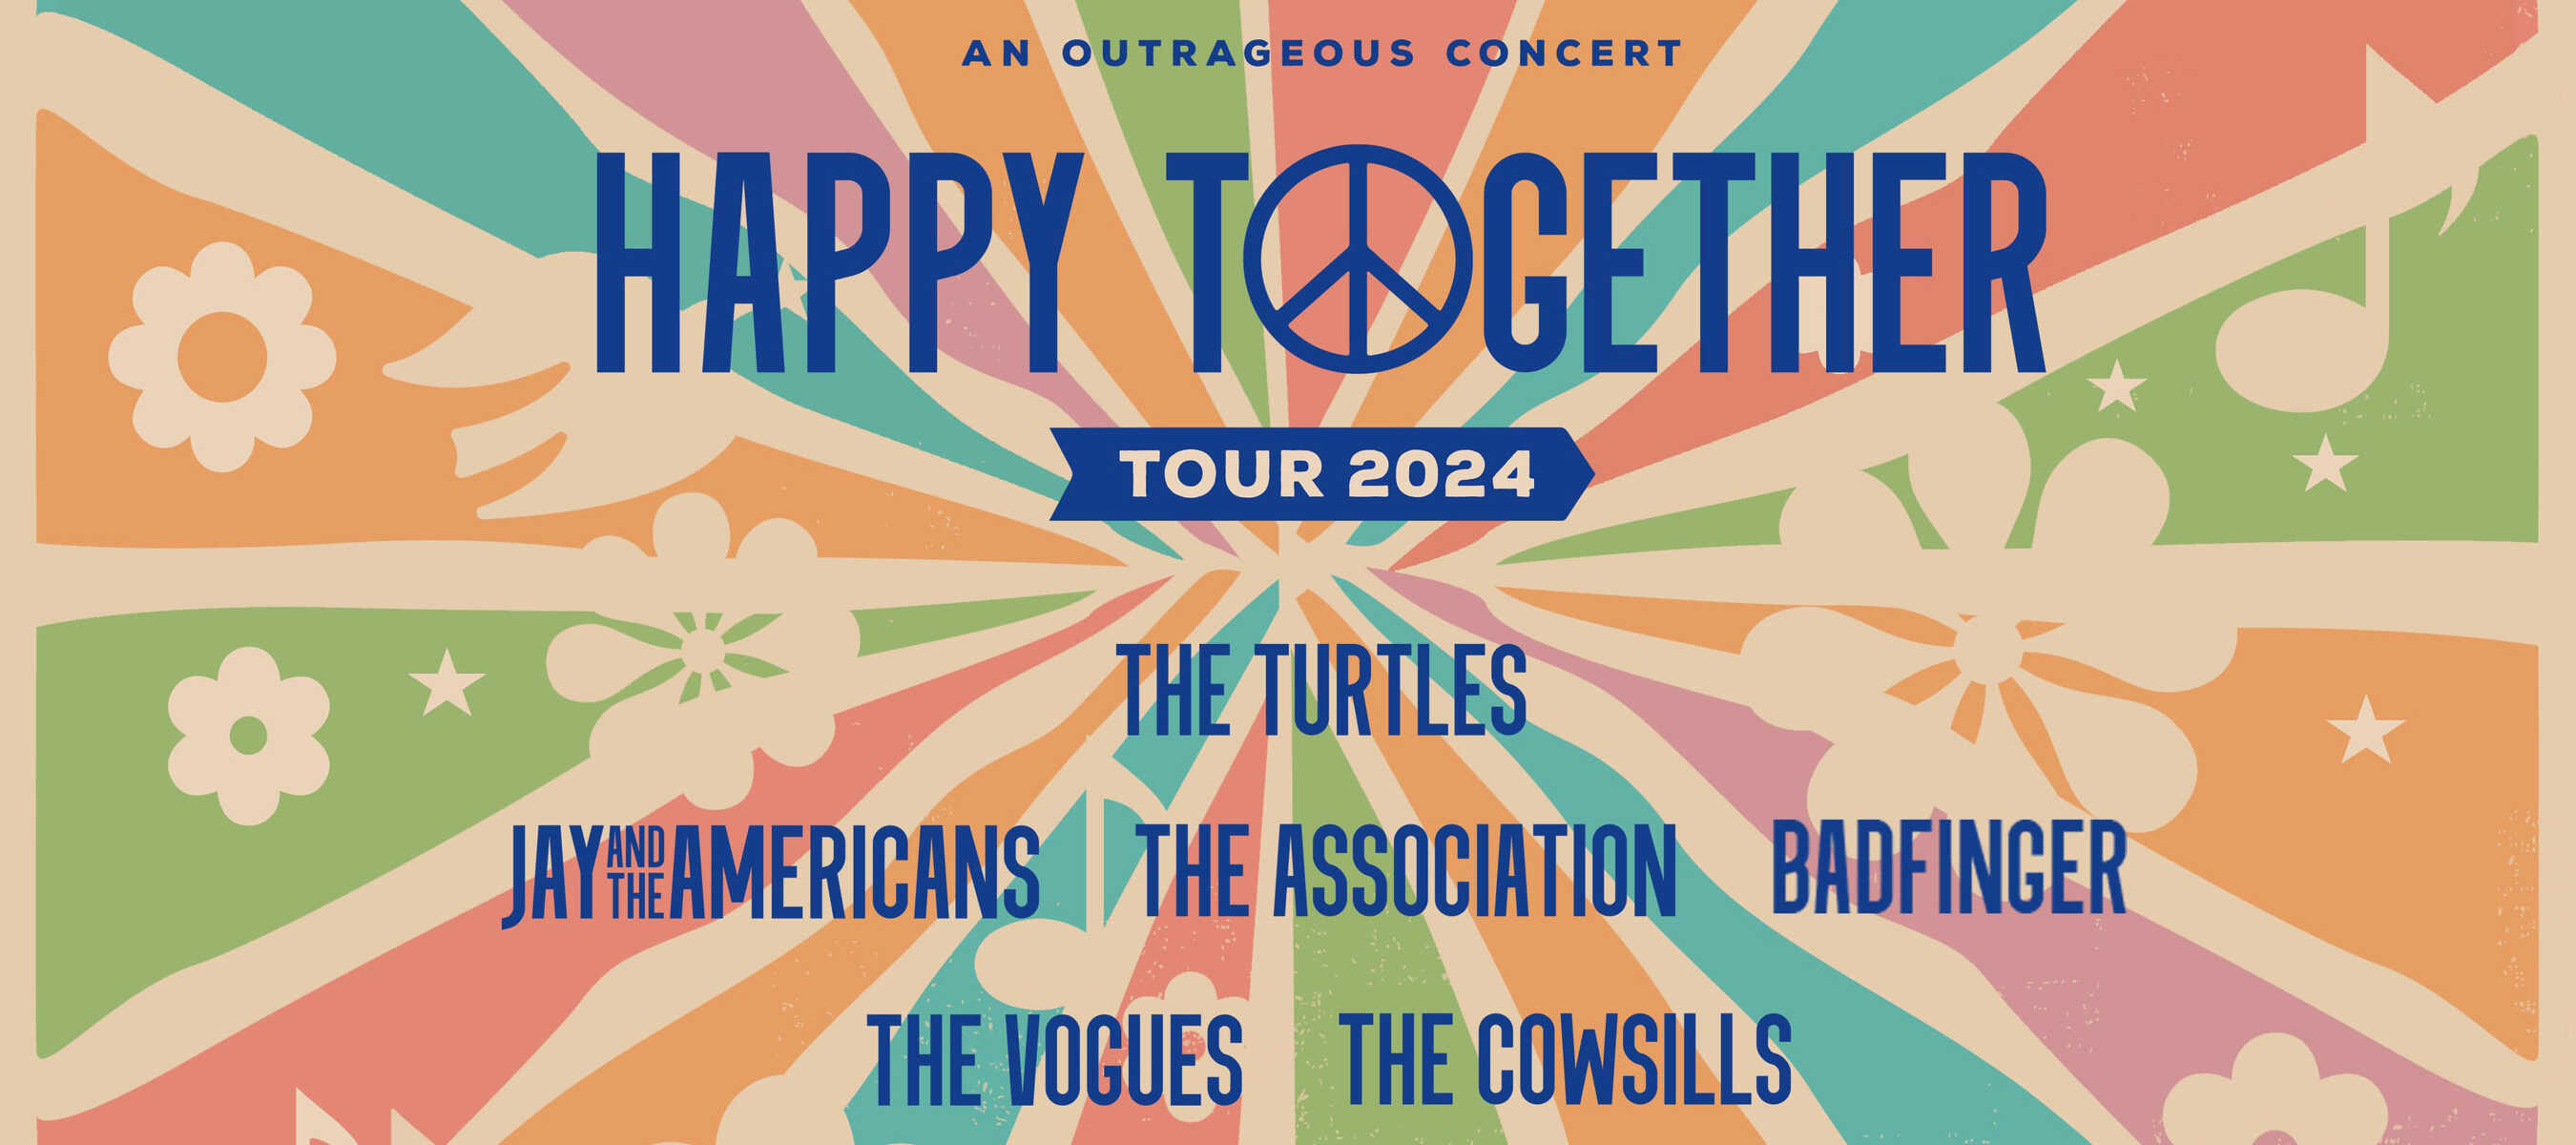 Happy Together Tour 2024 featuring The Turtles, Jay and the Americans